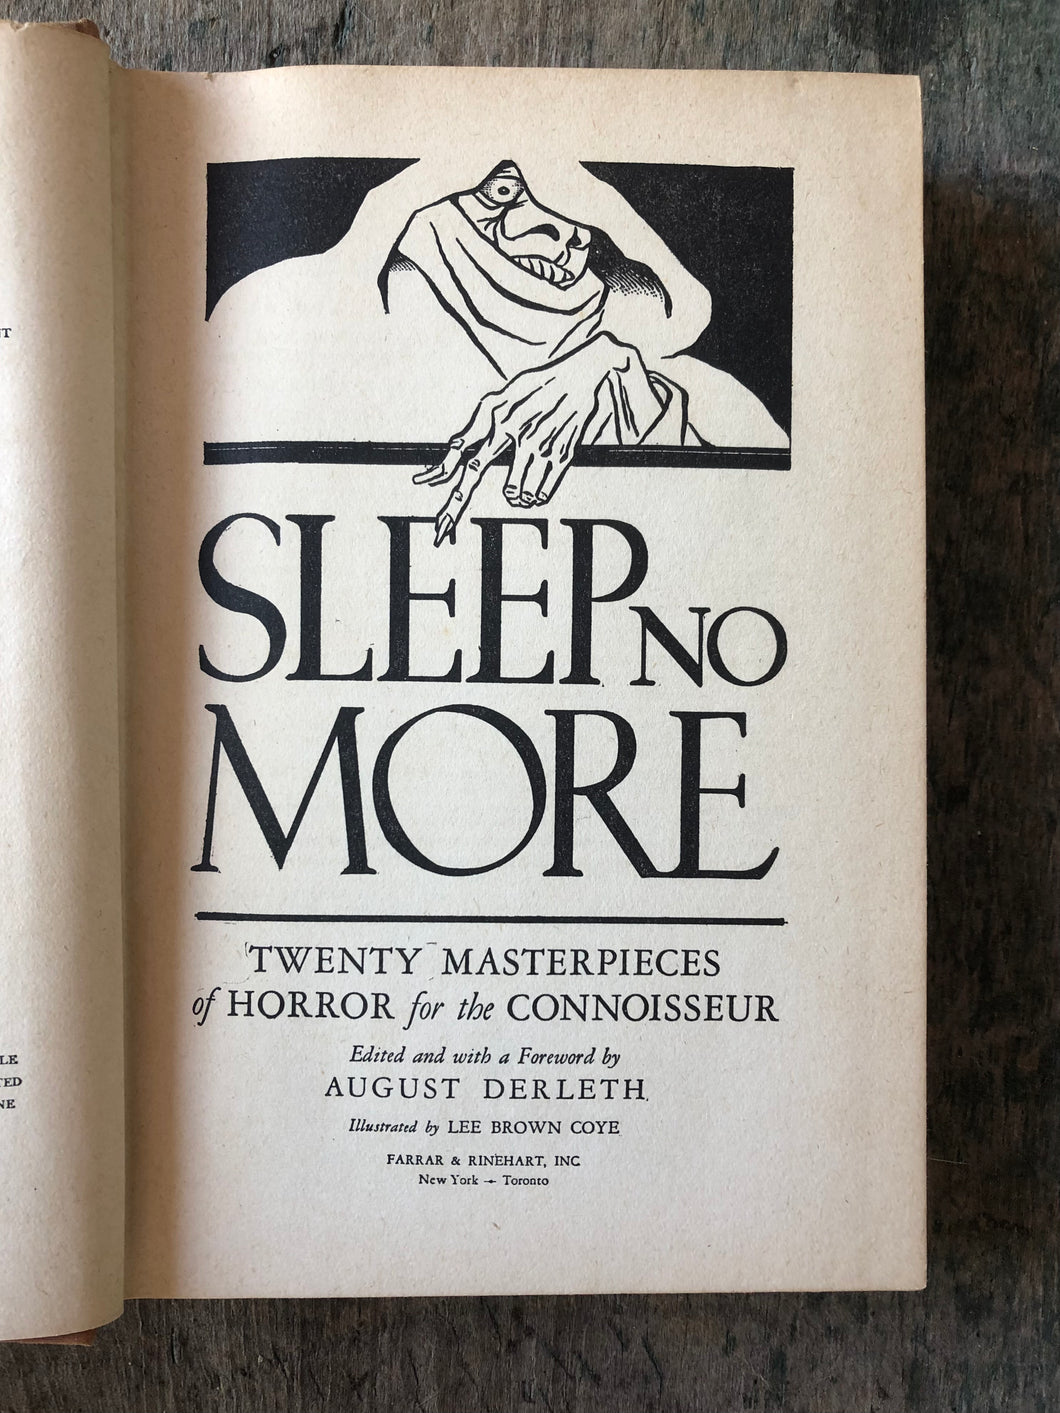 Sleep No More: Twenty Masterpieces of Horror for the Connoisseur. Edited with a foreword by August Derleth. Illustrated by Lee Brown Coye